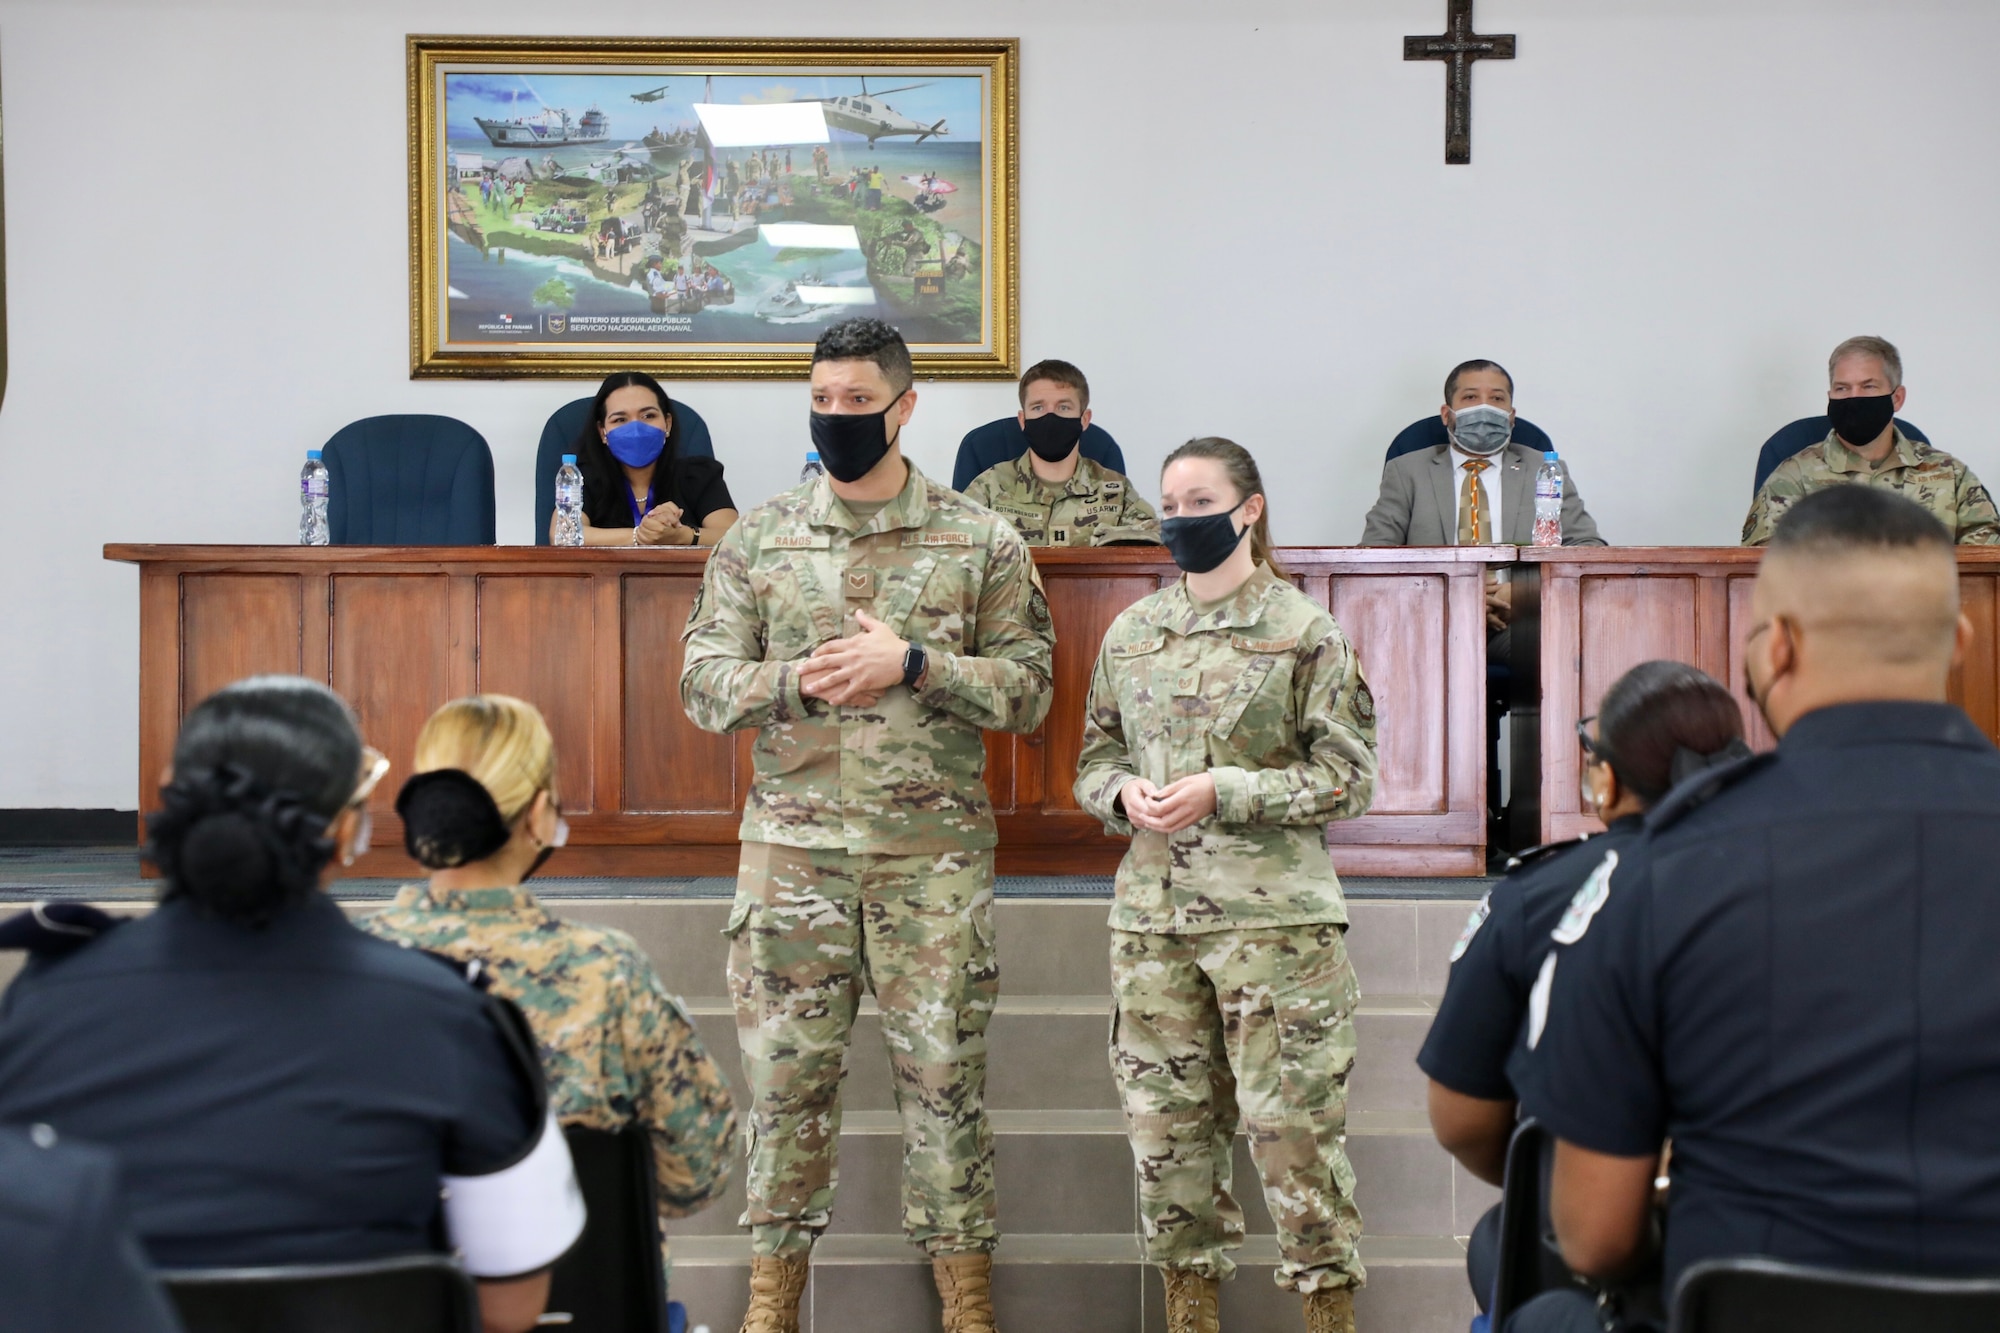 571st MSAS supports Women’s Peace, Security event in Panama